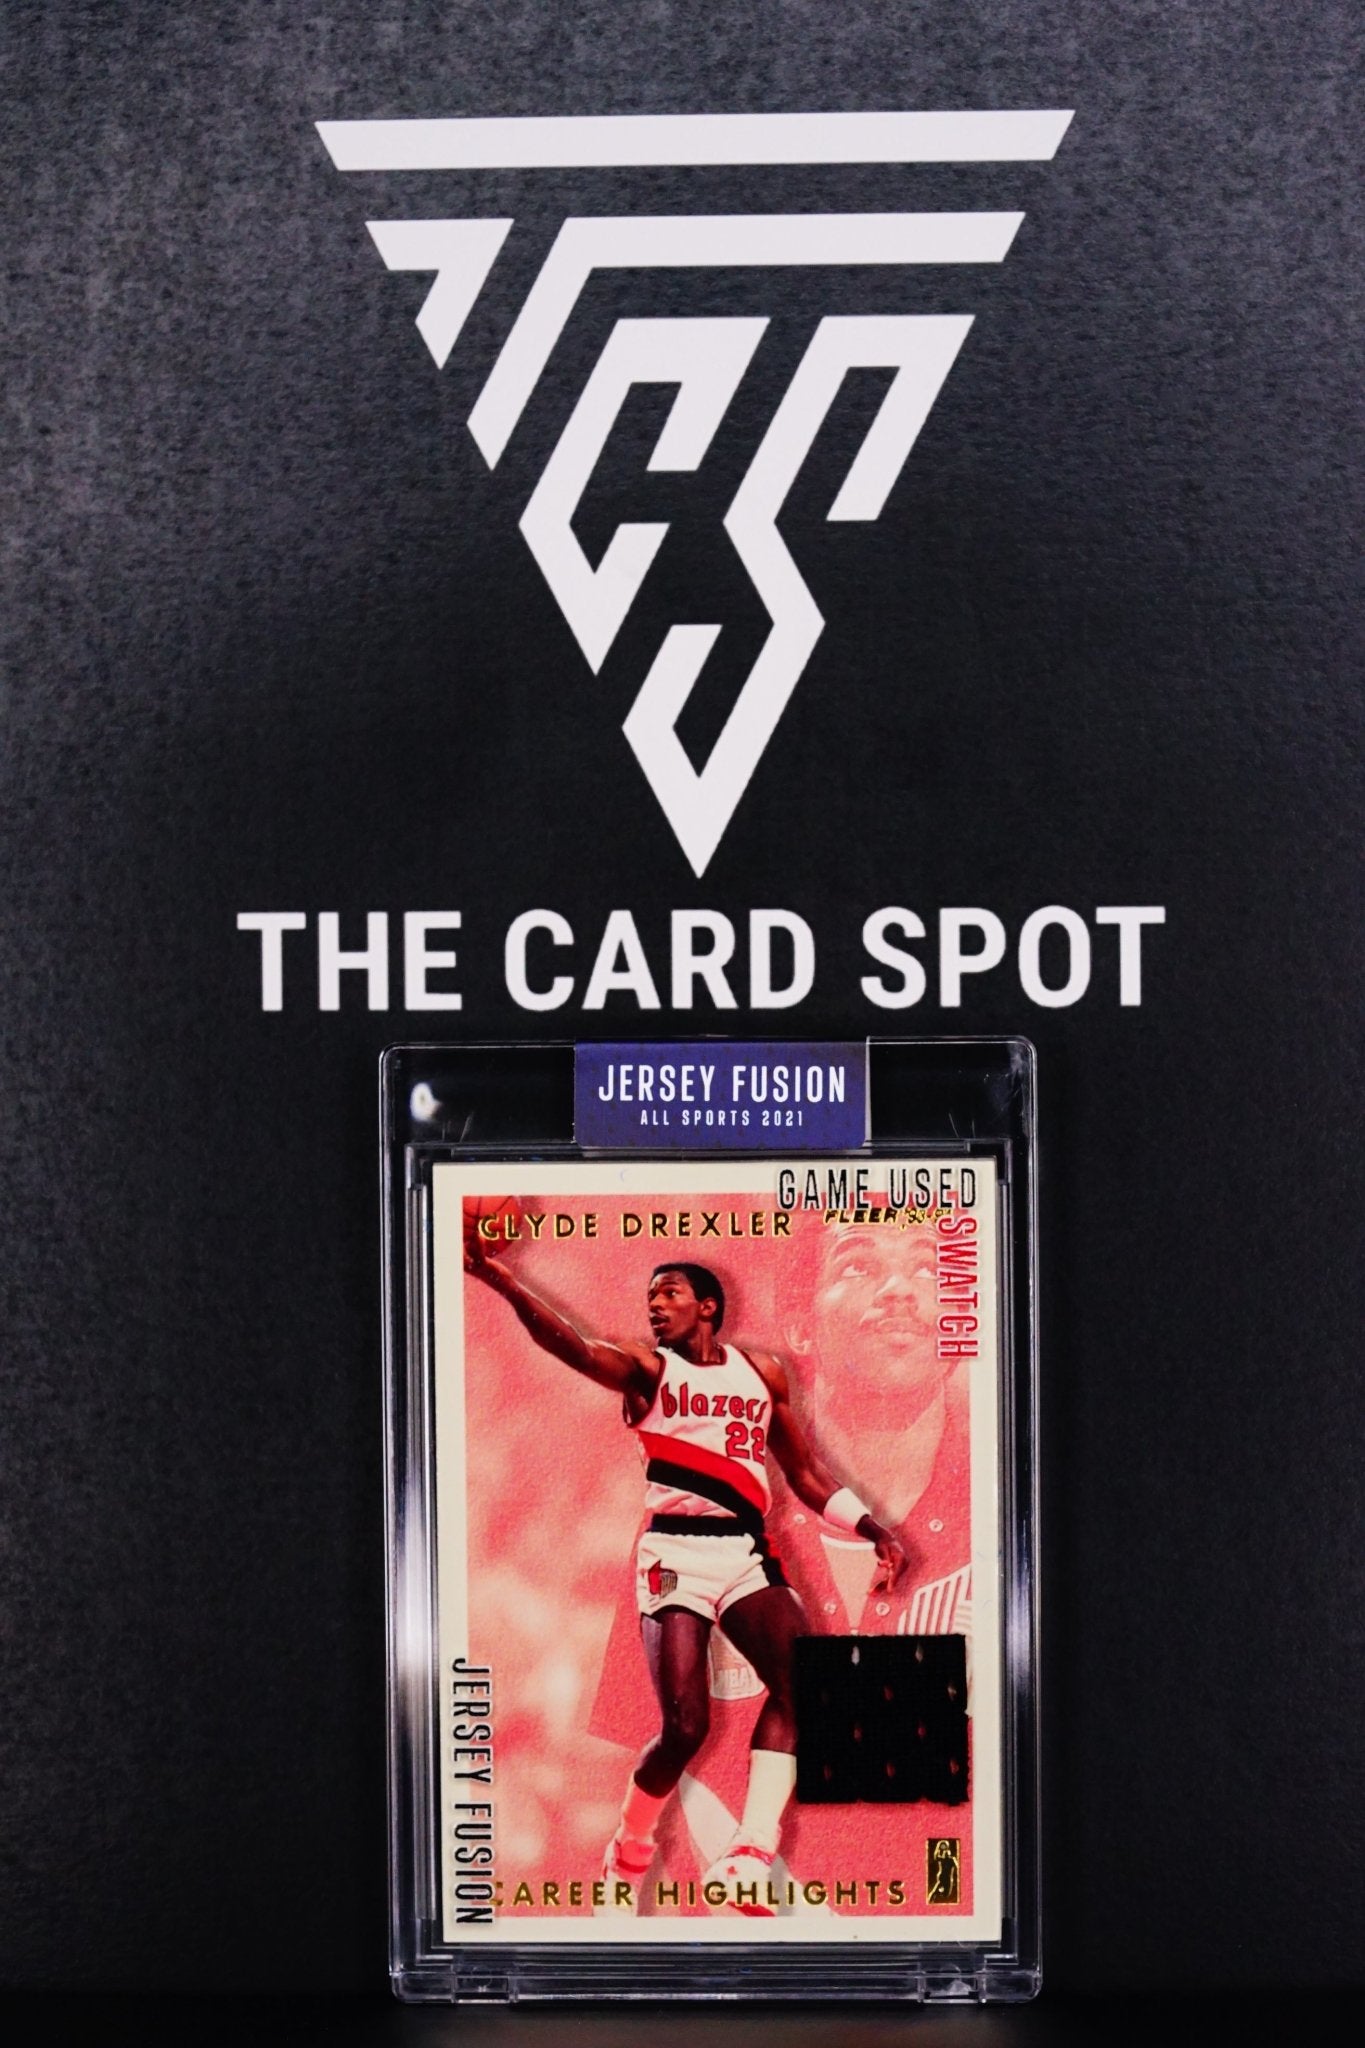 Basketball card: CLYDE DREXLER Game used - Jersey Fusion 1/1 - THE CARD SPOT PTY LTD.Sports CardJersey Fusion